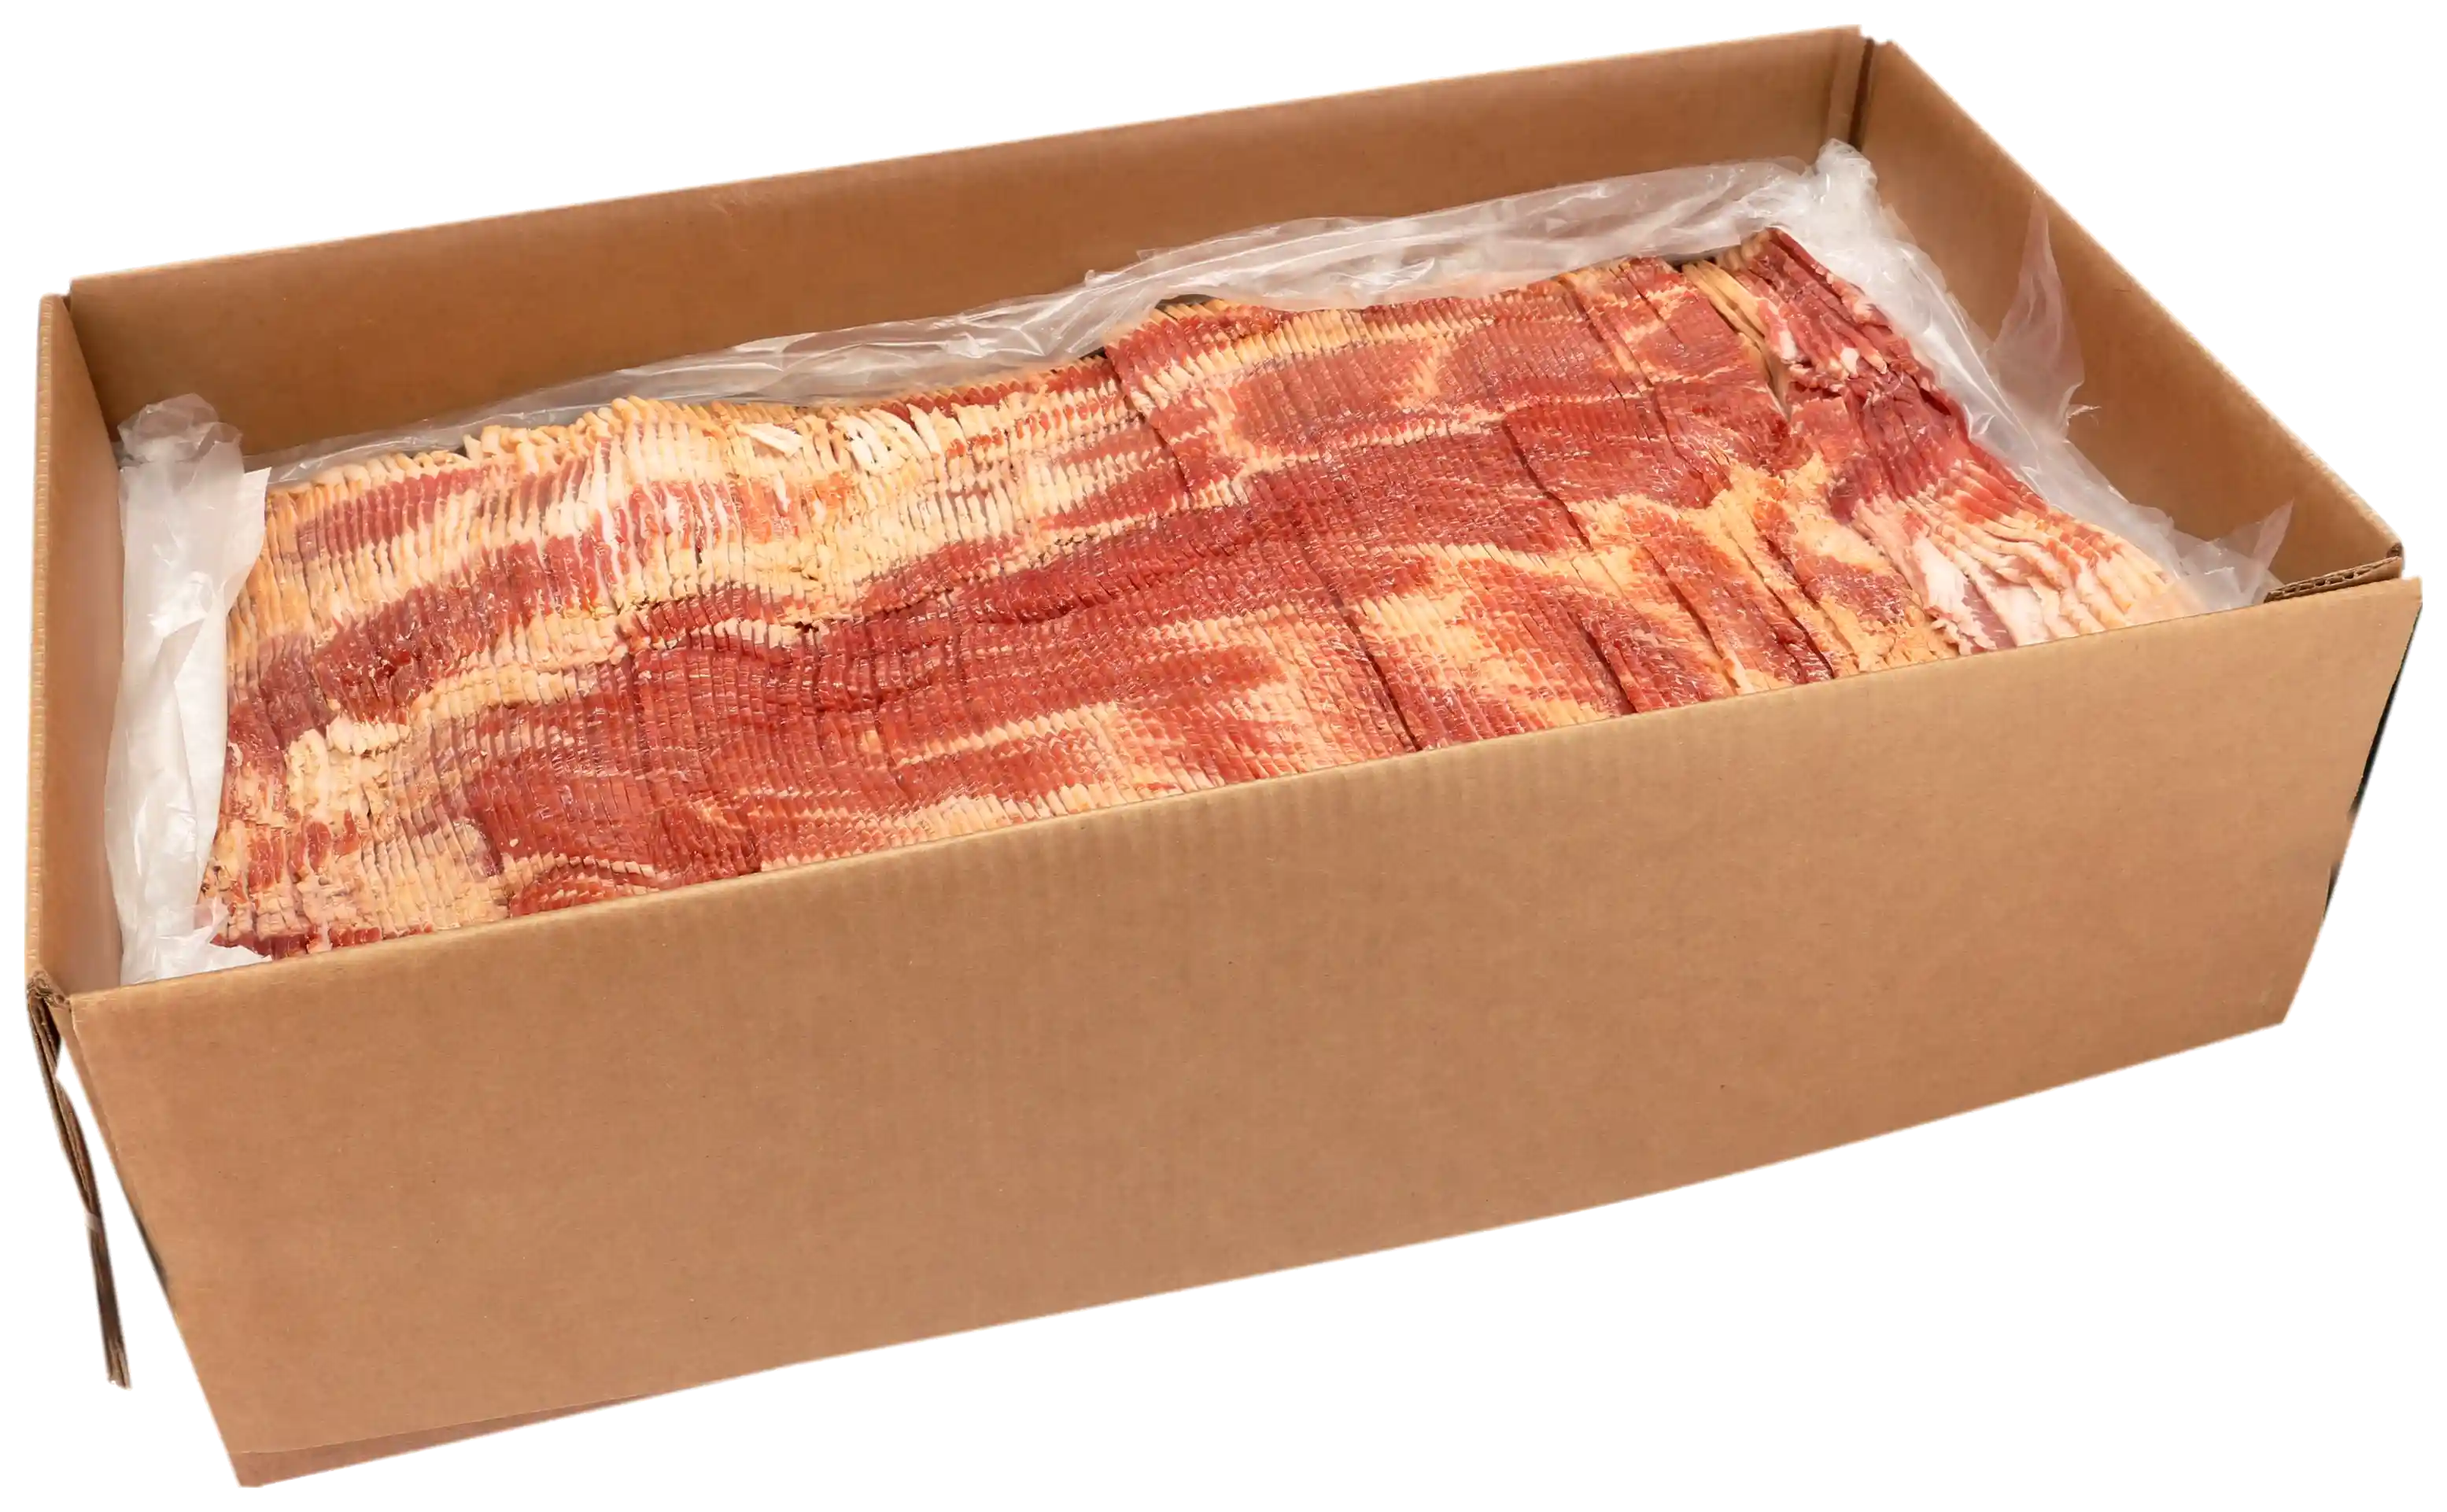 Wright® Brand Naturally Hickory Smoked Extra Thick Sliced Bacon, Bulk, 15 Lbs, 8-10 Slices per Pound, Frozen_image_41